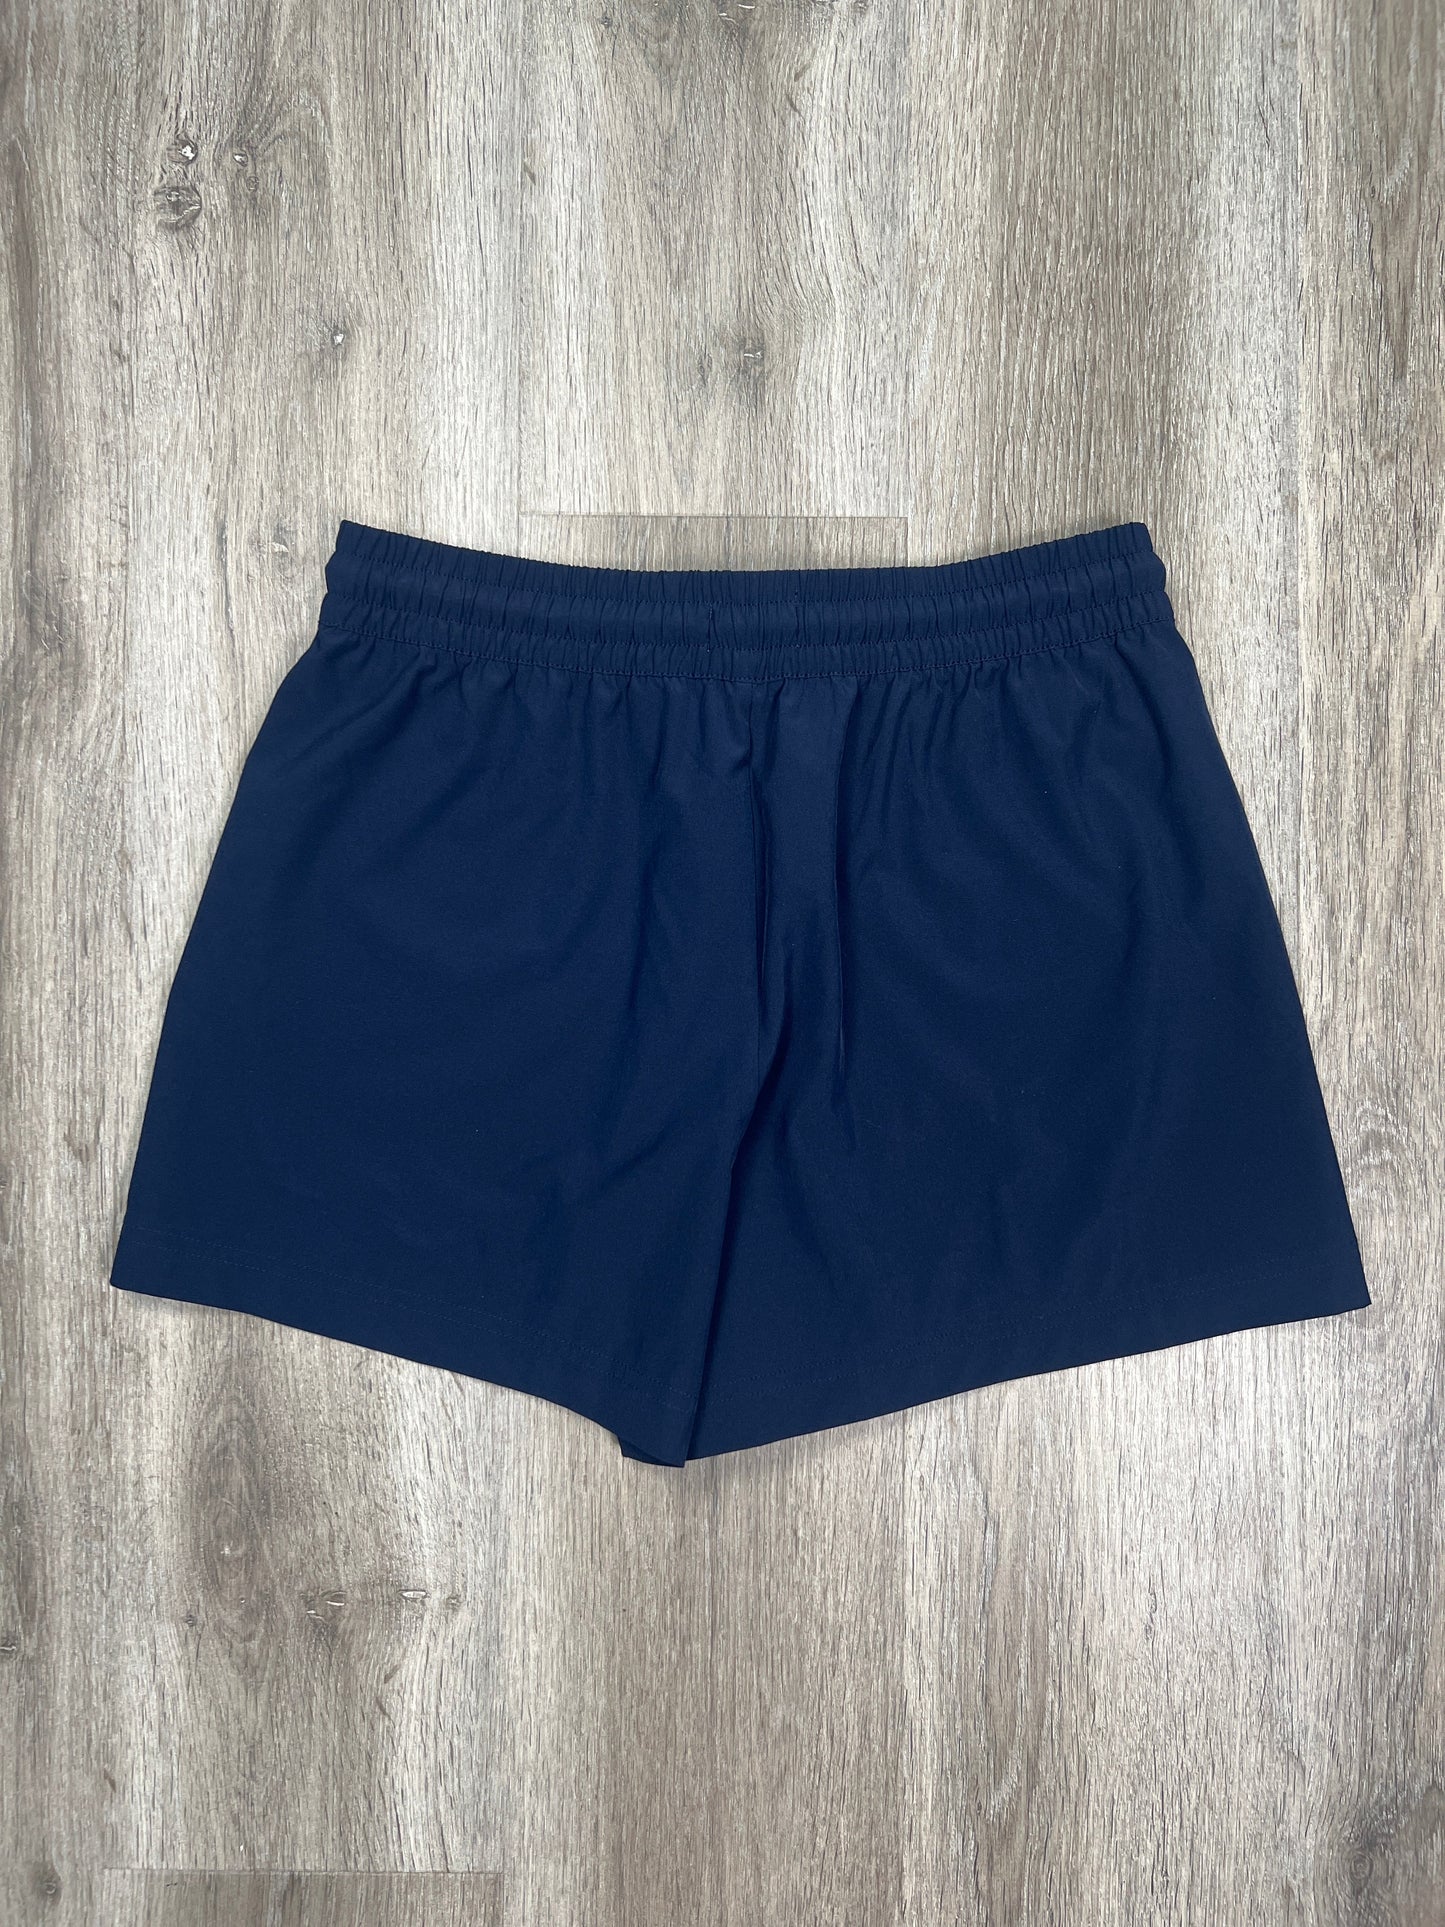 Navy Athletic Shorts Lou And Grey, Size S